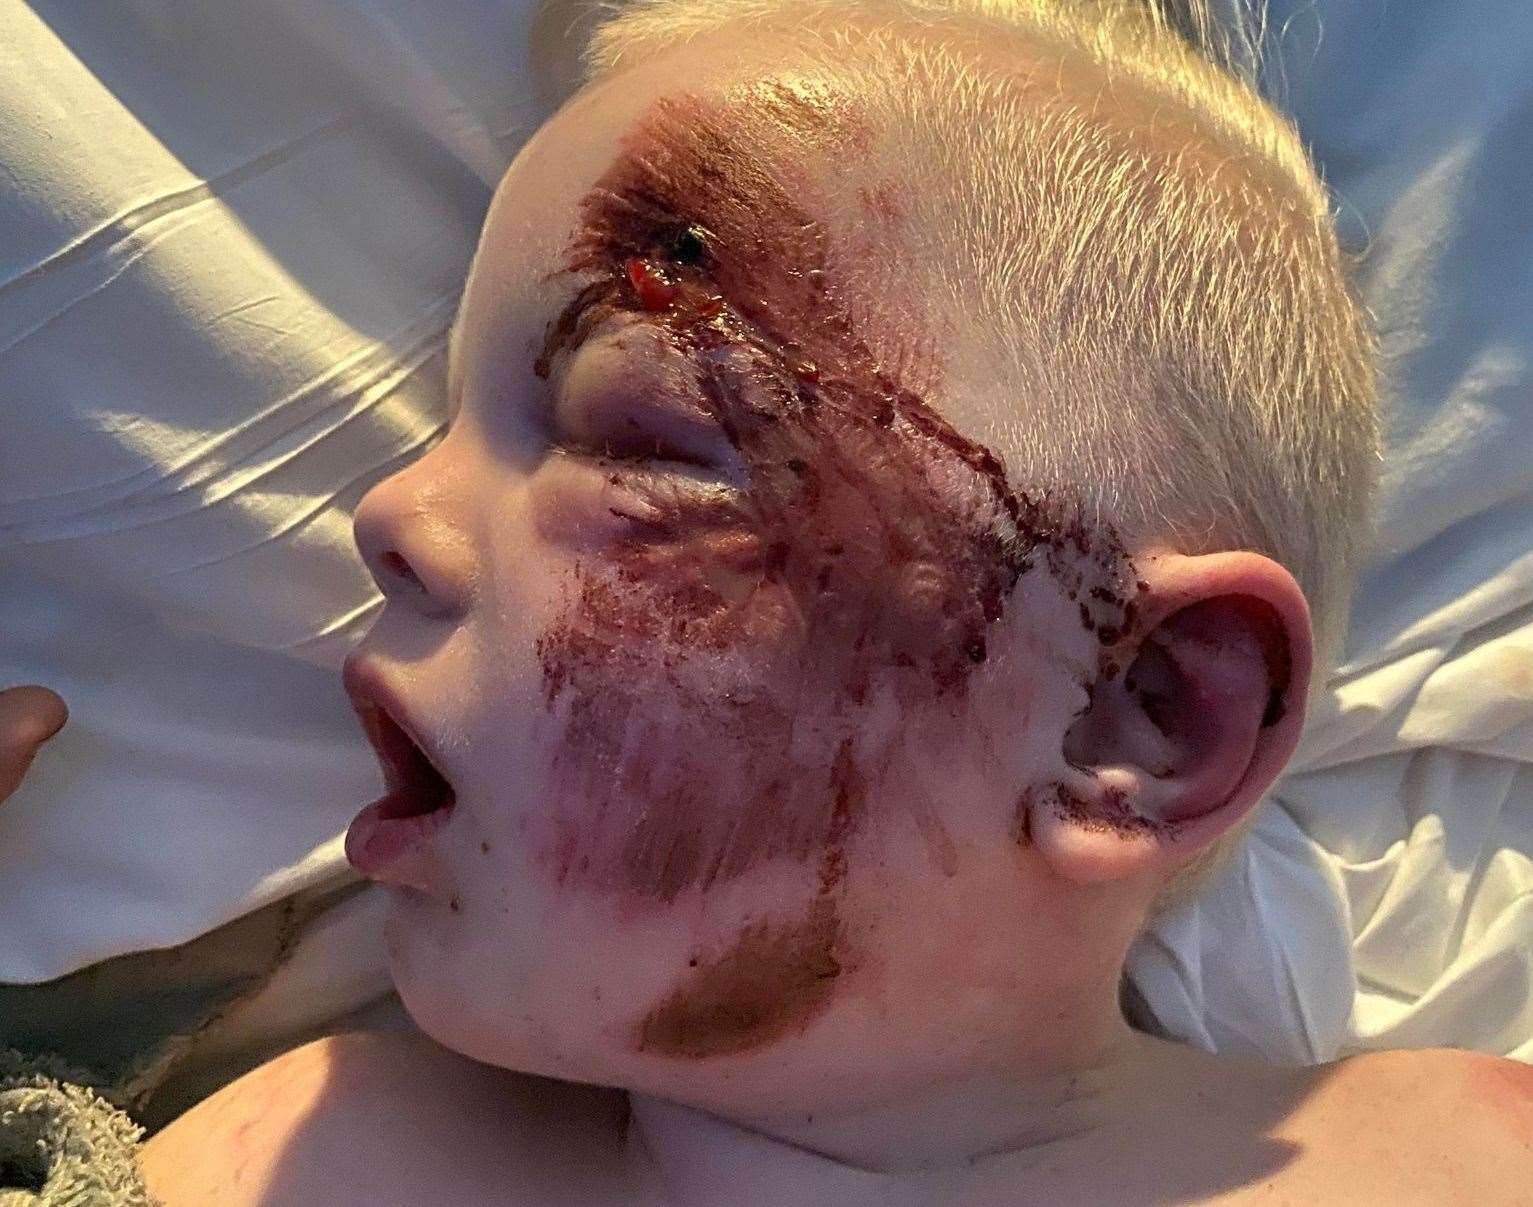 The injuries the four-year-old boy sustained after being hit by a car in Bell Road, Sittingbourne. Picture: Ethan Cording